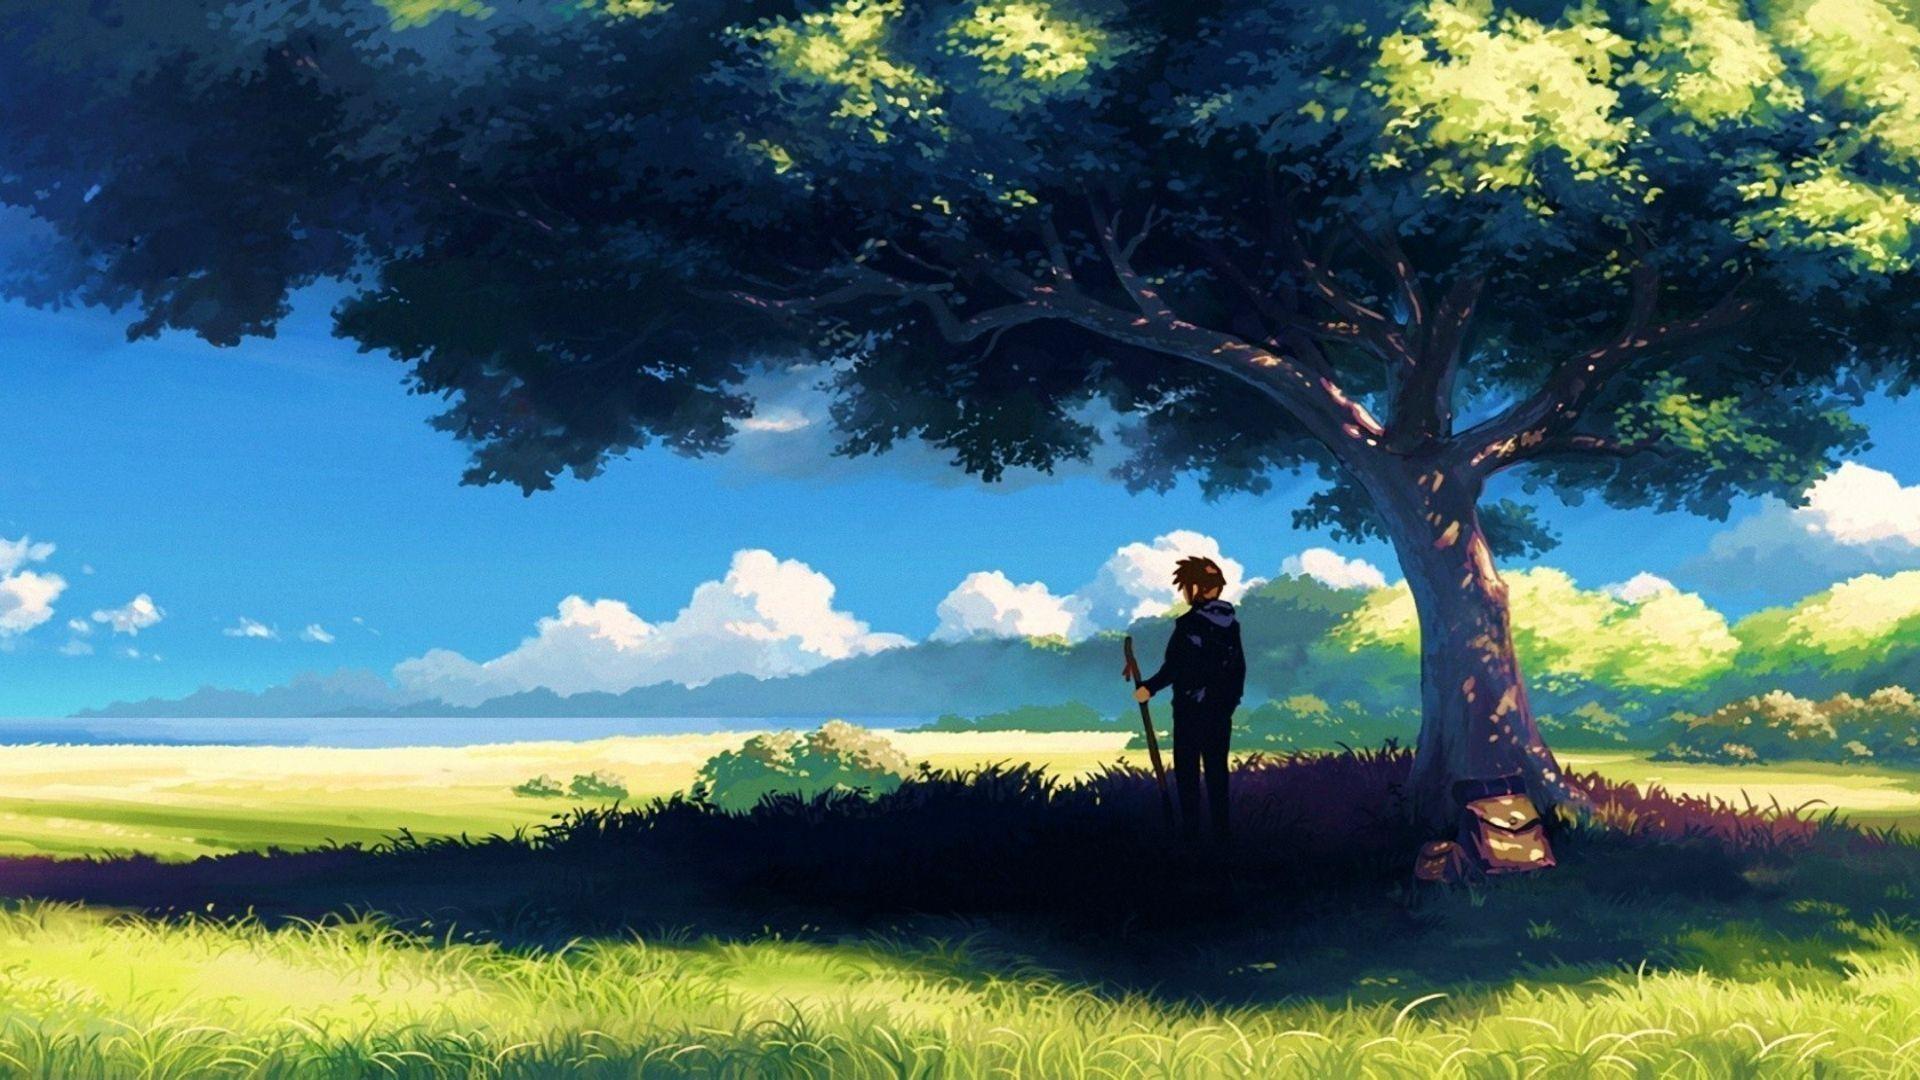  Anime  Landscape  Phone Wallpapers  Top Free Anime  